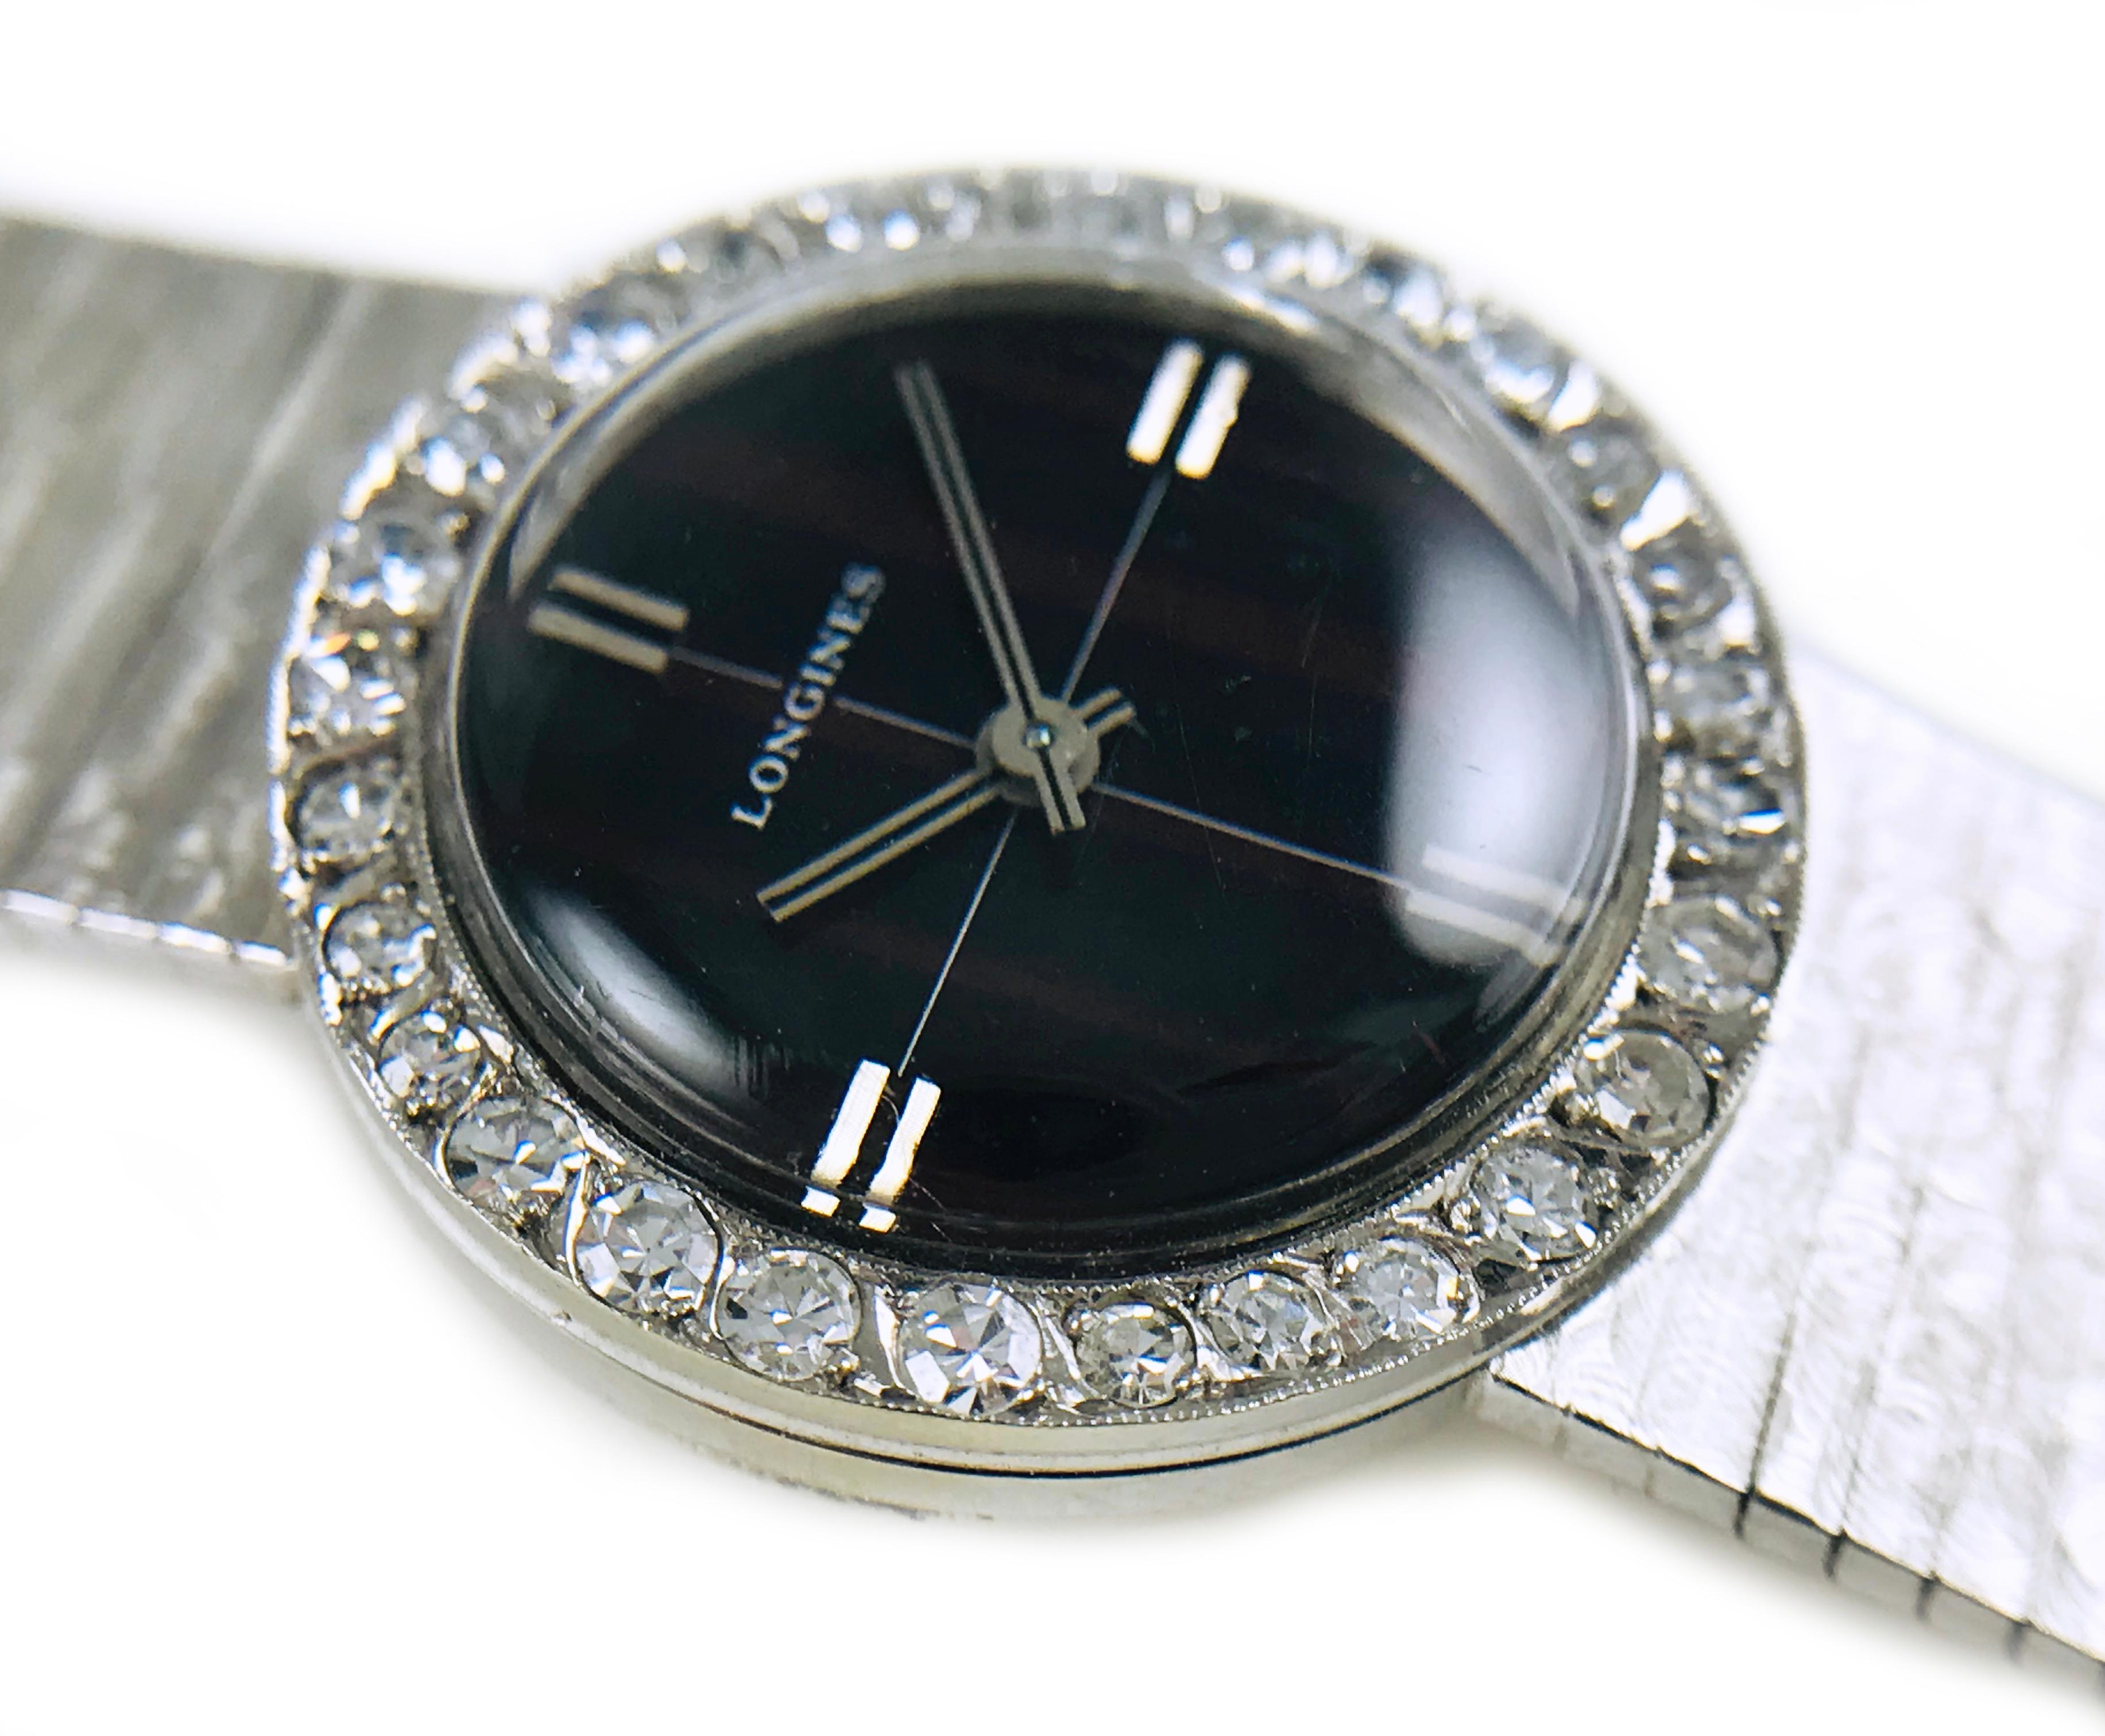 Longines Diamond Gold Watch, 1955. The dial has a unique black and burgundy shadow pinstripe pattern. Twenty-eight round diamonds adorn the dial. The watch has double white gold hours and double white gold bars for the hour and minute hands. 14k